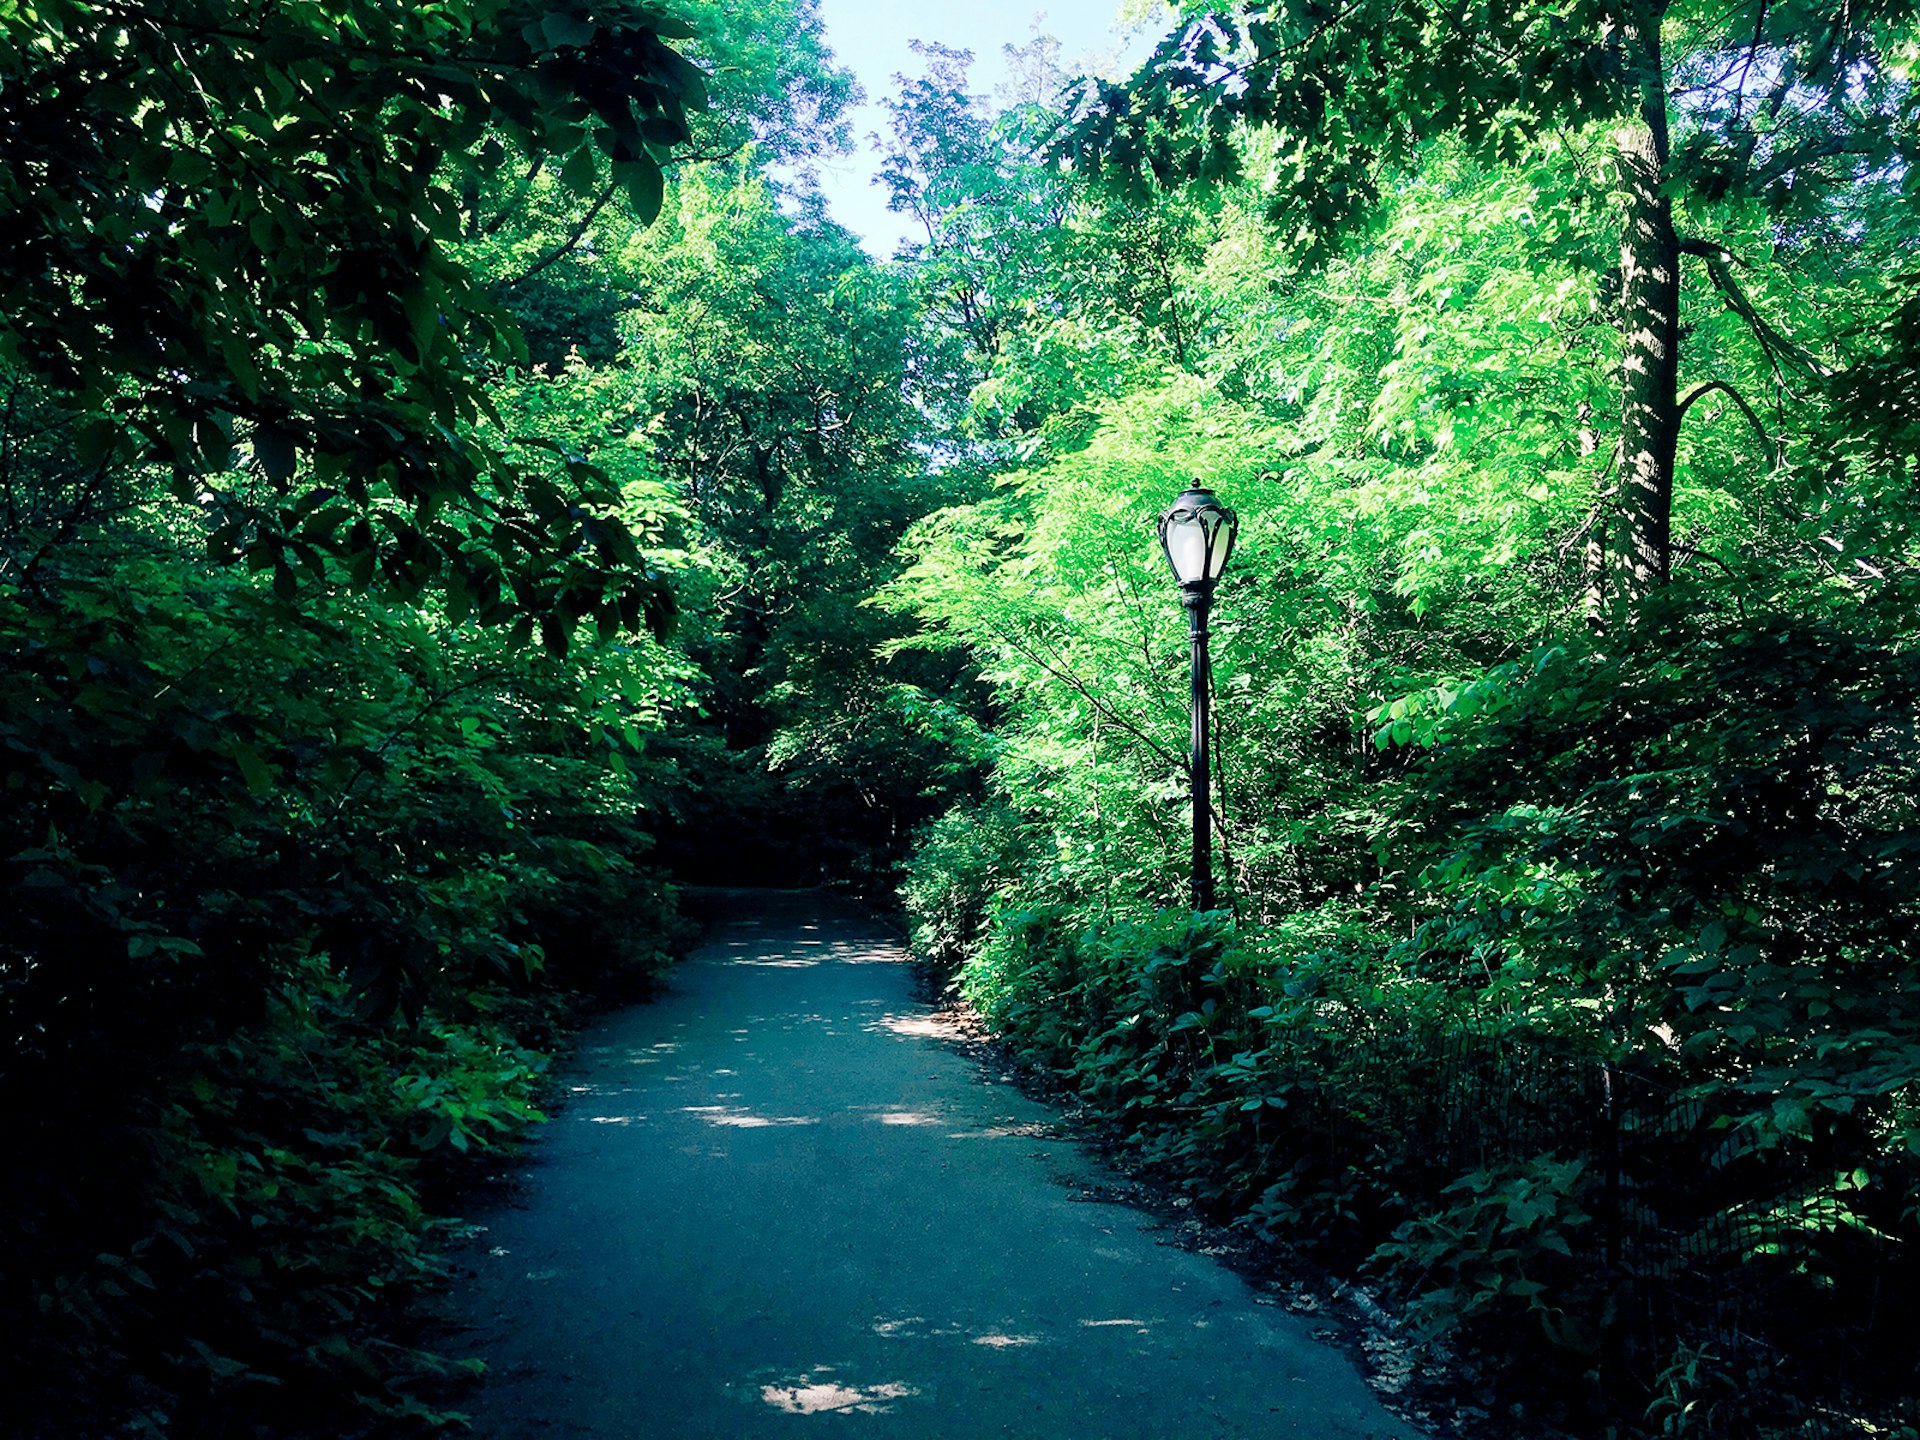 Paved path through Central Park, lined with green trees and bushes and a lamppost © Mikki Brammer / Lonely Planet